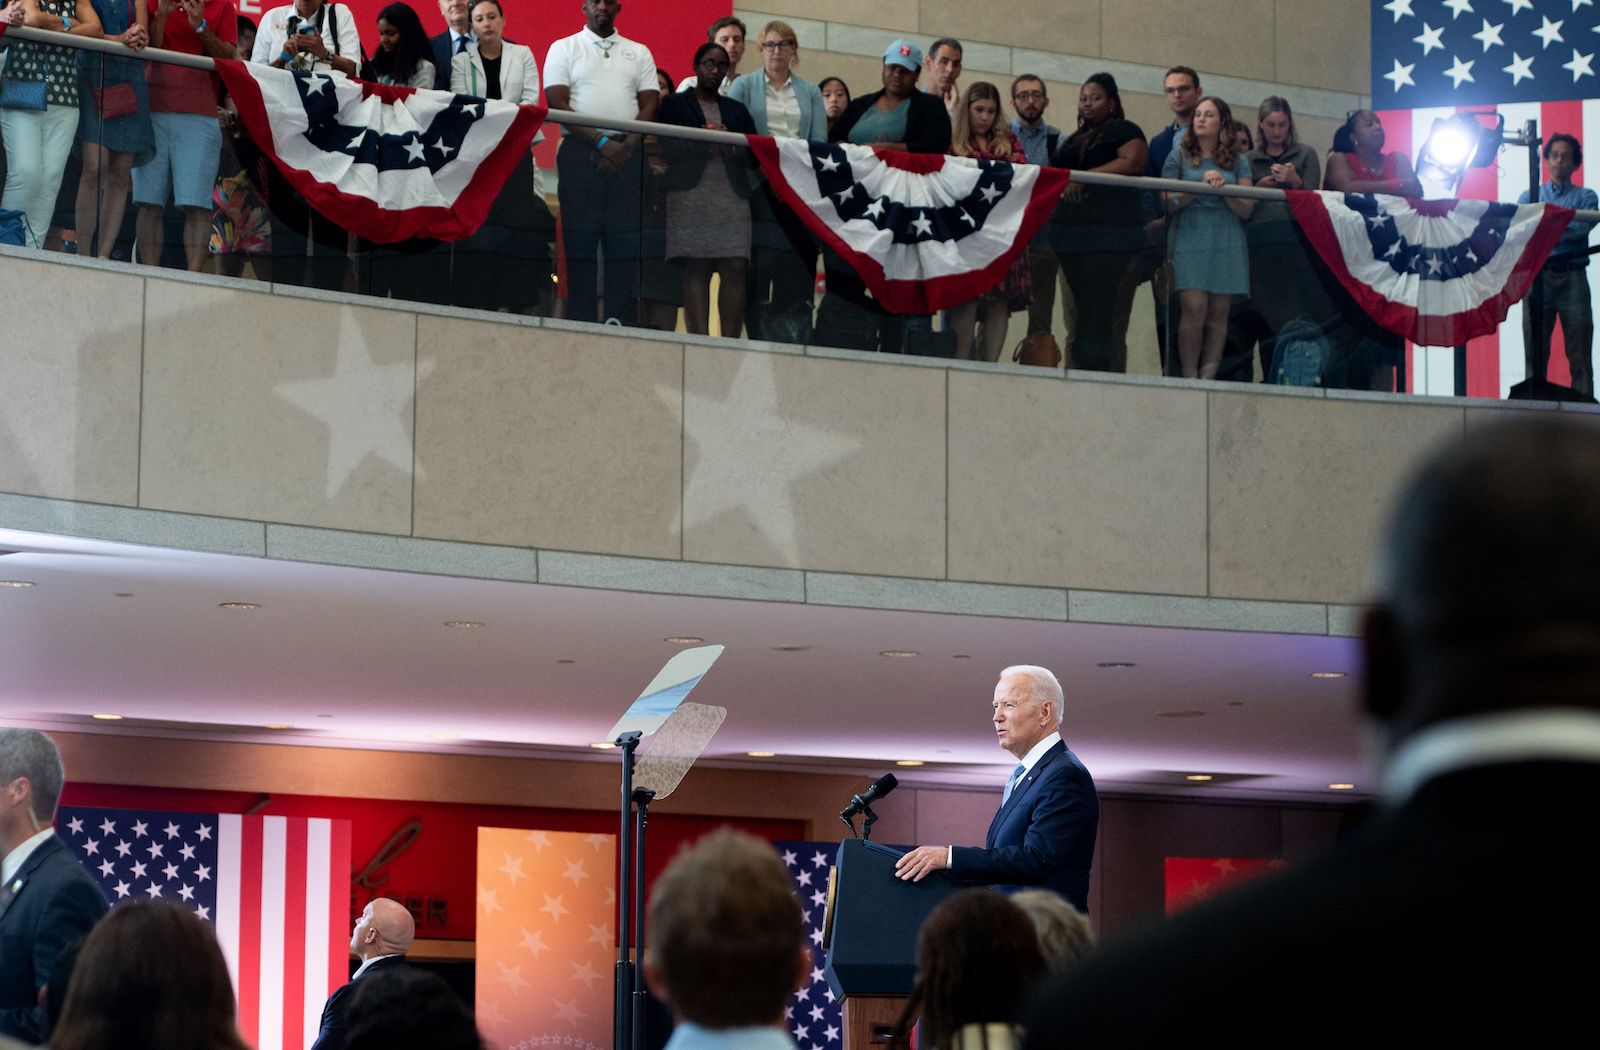 People listen as US President Joe Biden speaks about voting rights at the National Constitution Center in Philadelphia, Pennsylvania, July 13, 2021. (Photo by SAUL LOEB / AFP) (Photo by SAUL LOEB/AFP via Getty Images)